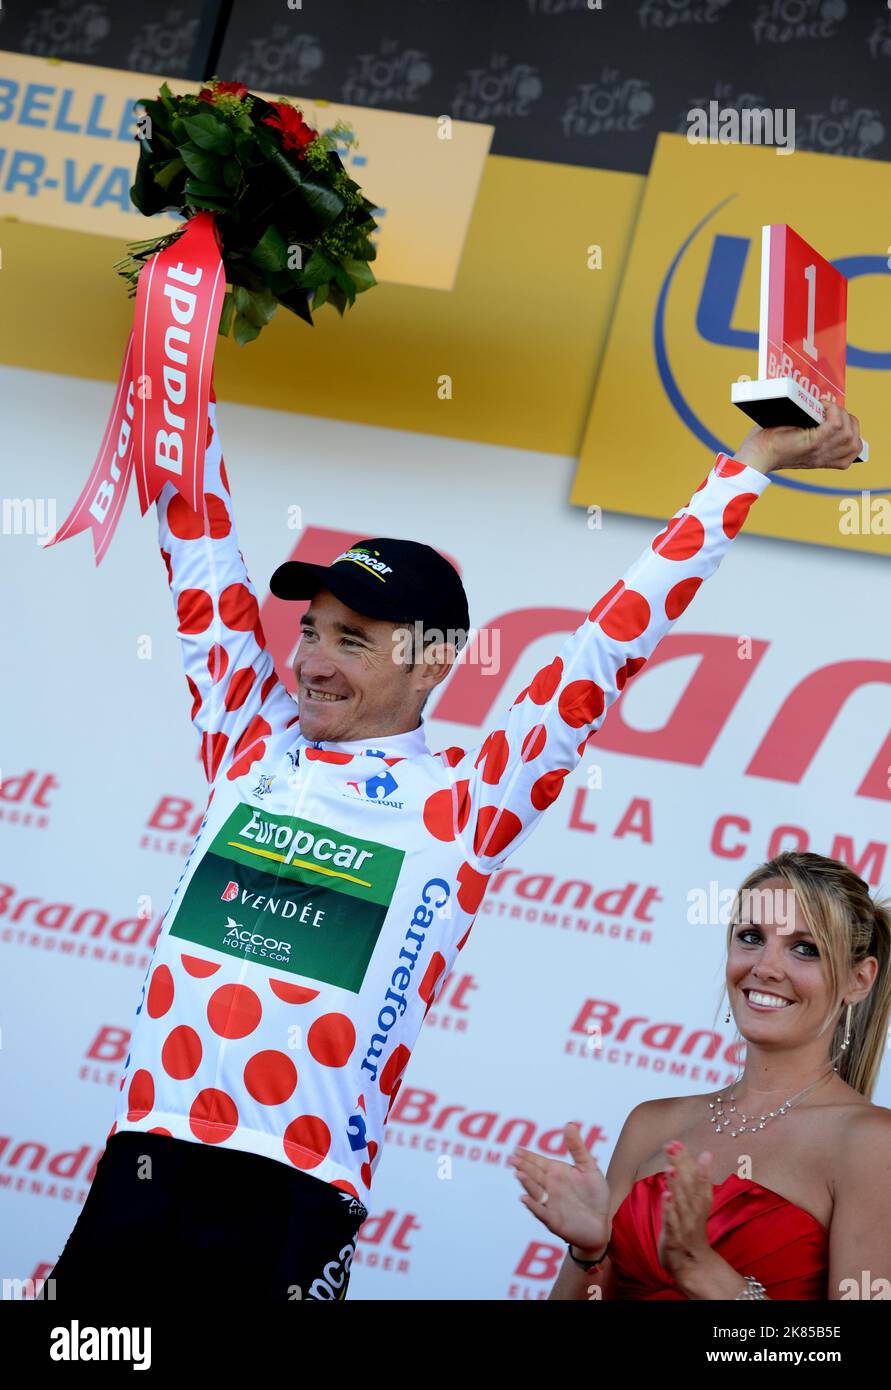 Thomas Voeckler team Europecar, collects his trophy on the podium after winning Stage 10 and taking the mountain leader's jersey, as well as the Brandt prize for the most competitive, Macon - Bellegarde - sur - Valserine. Stock Photo